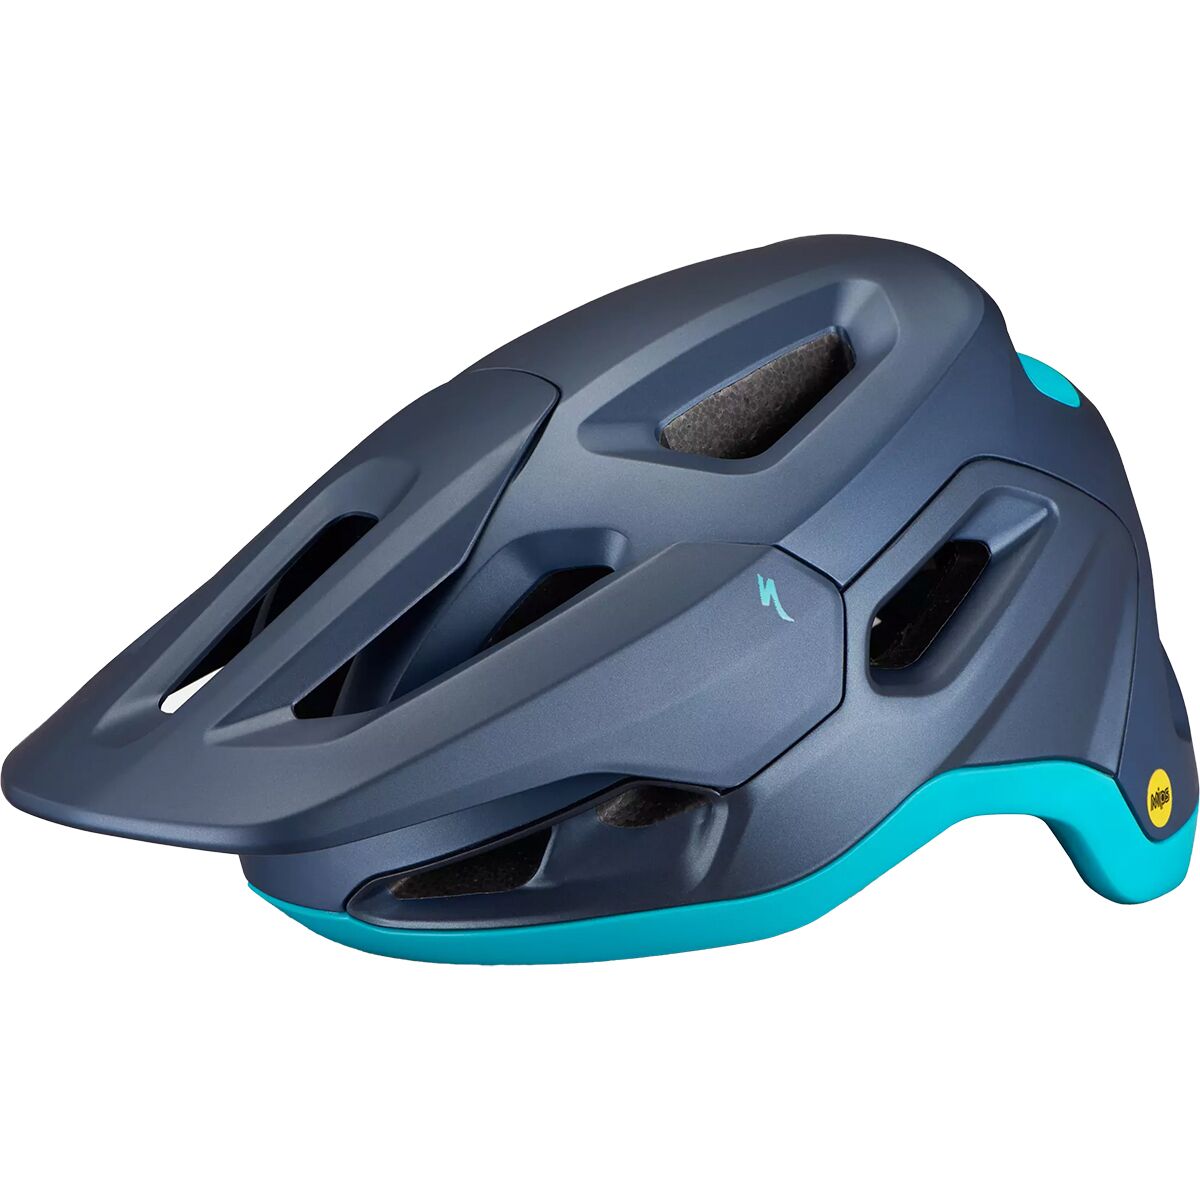 Specialized Tactic 4 Mips Round Fit Helmet